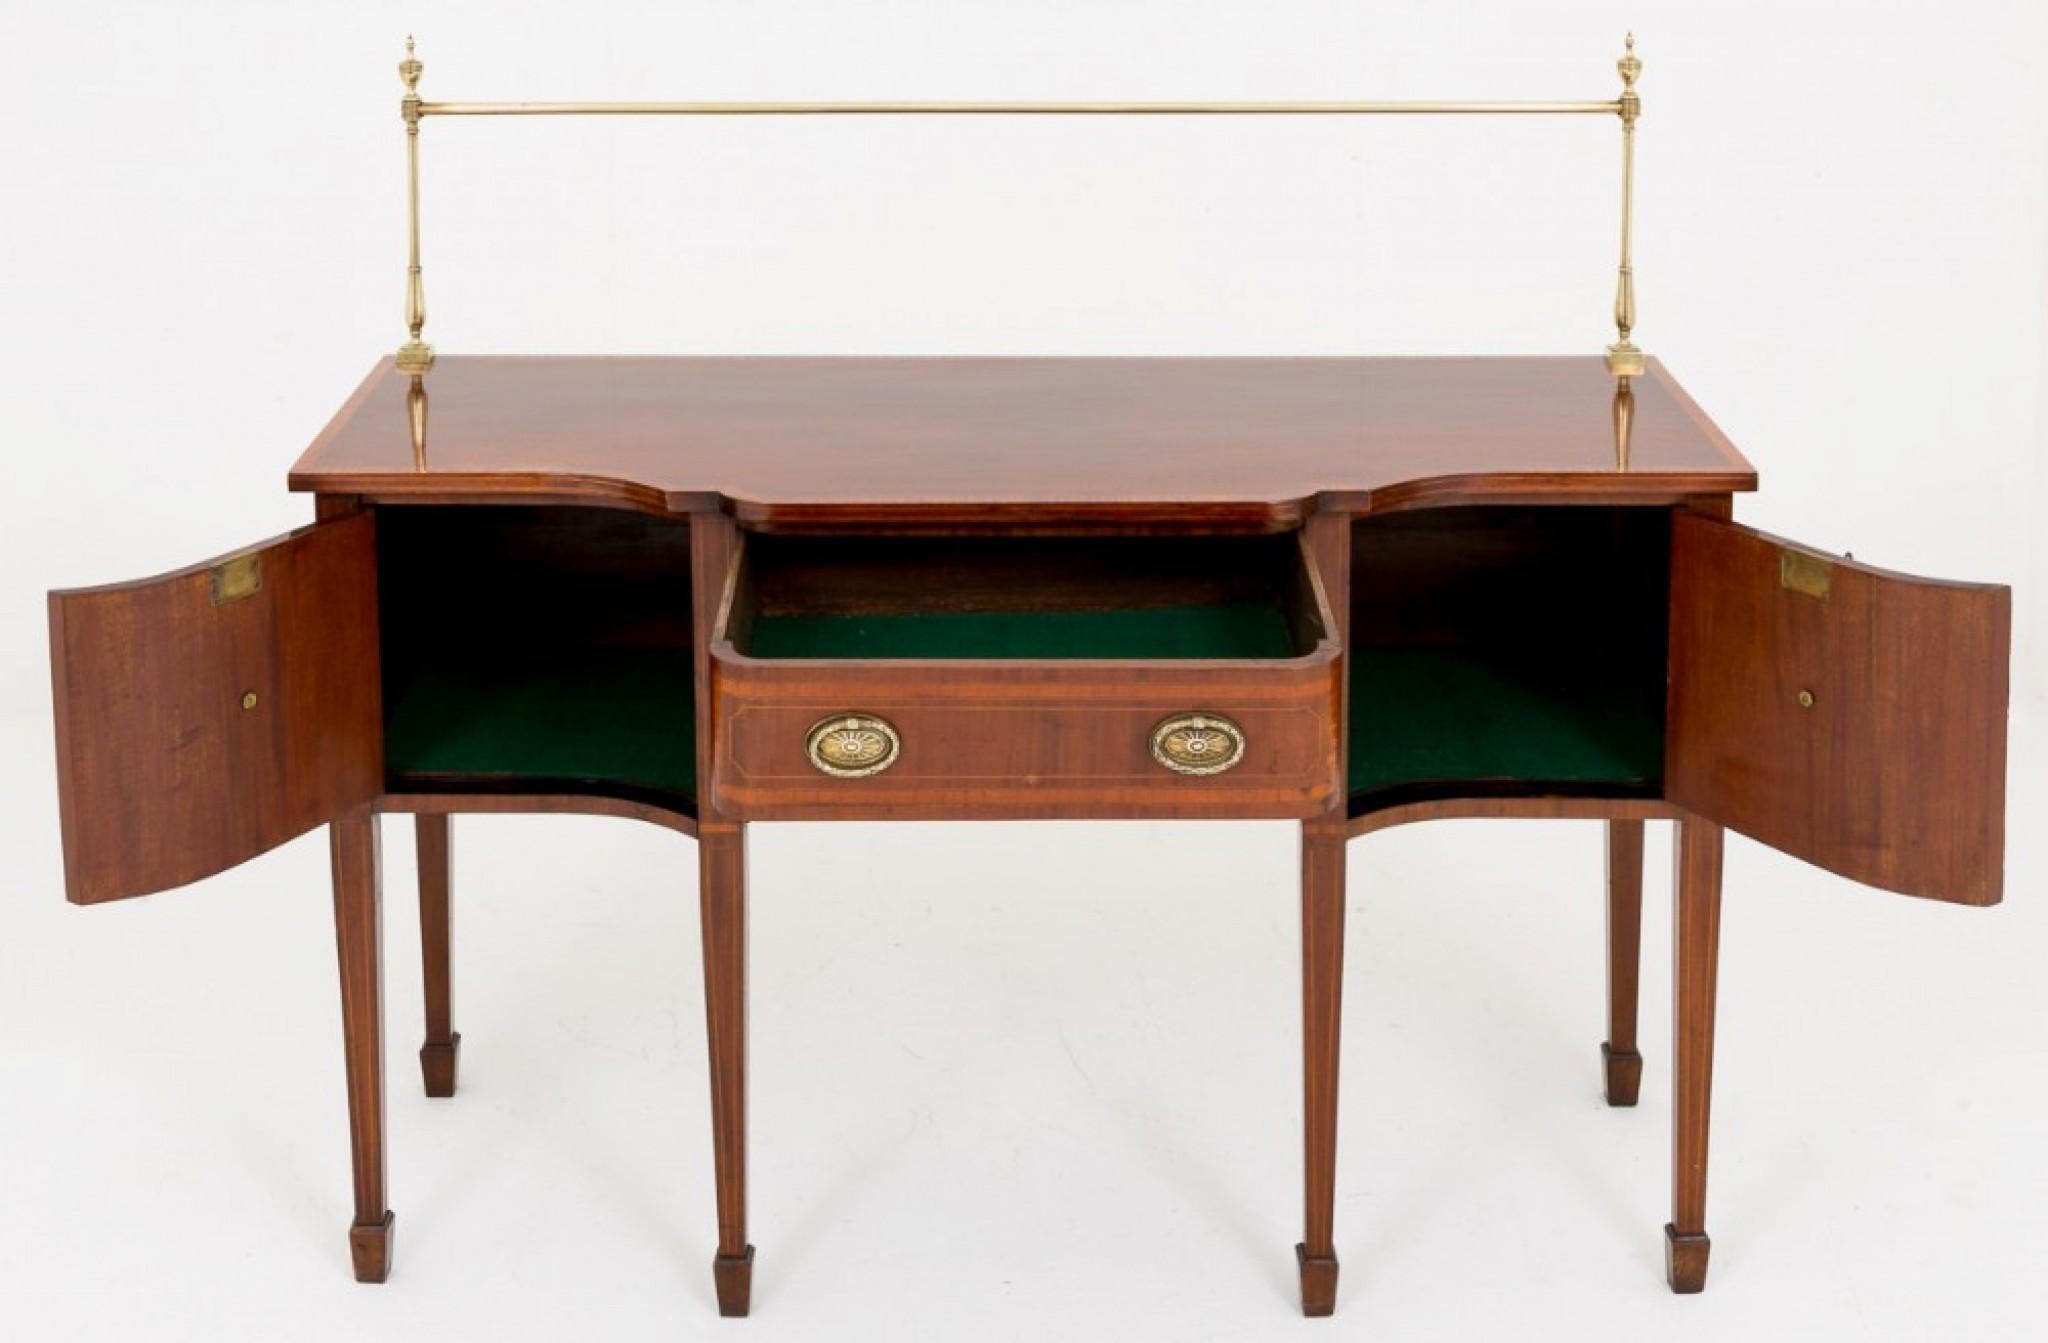 Late 19th Century Sheraton Revival Sideboard, Mahogany Server, 1880 For Sale